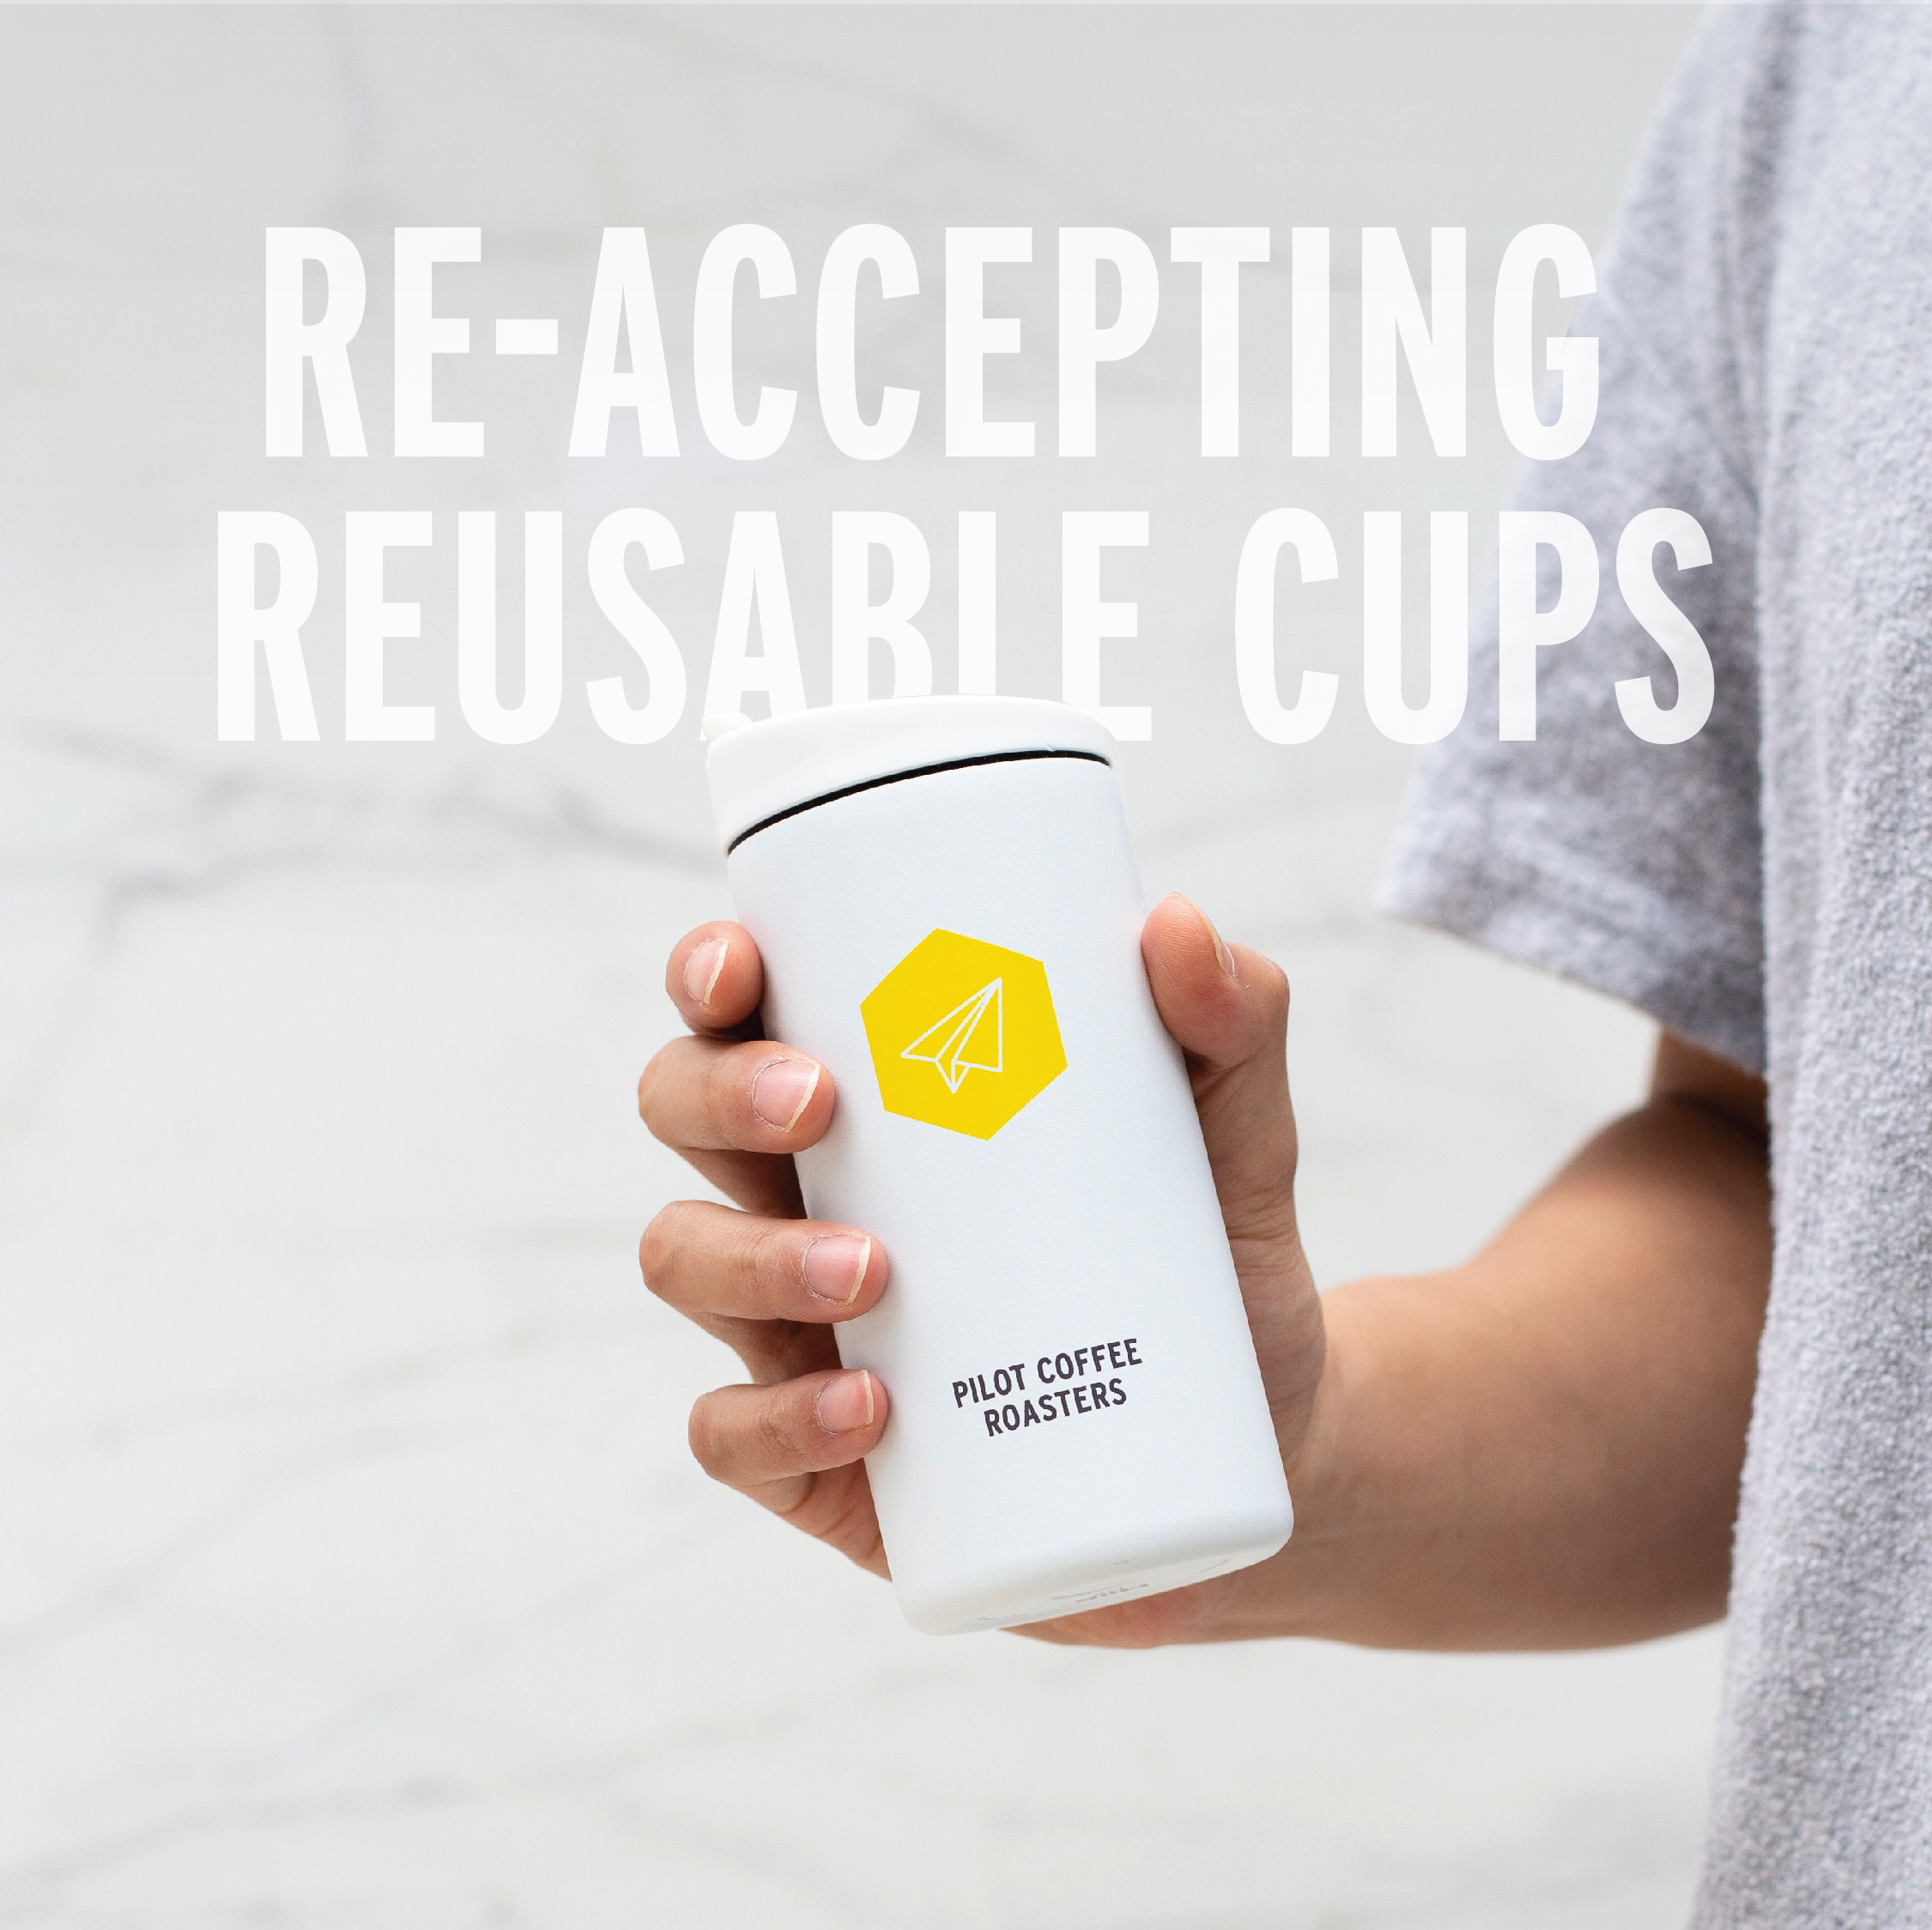 How often should we wash our reusable coffee cups?